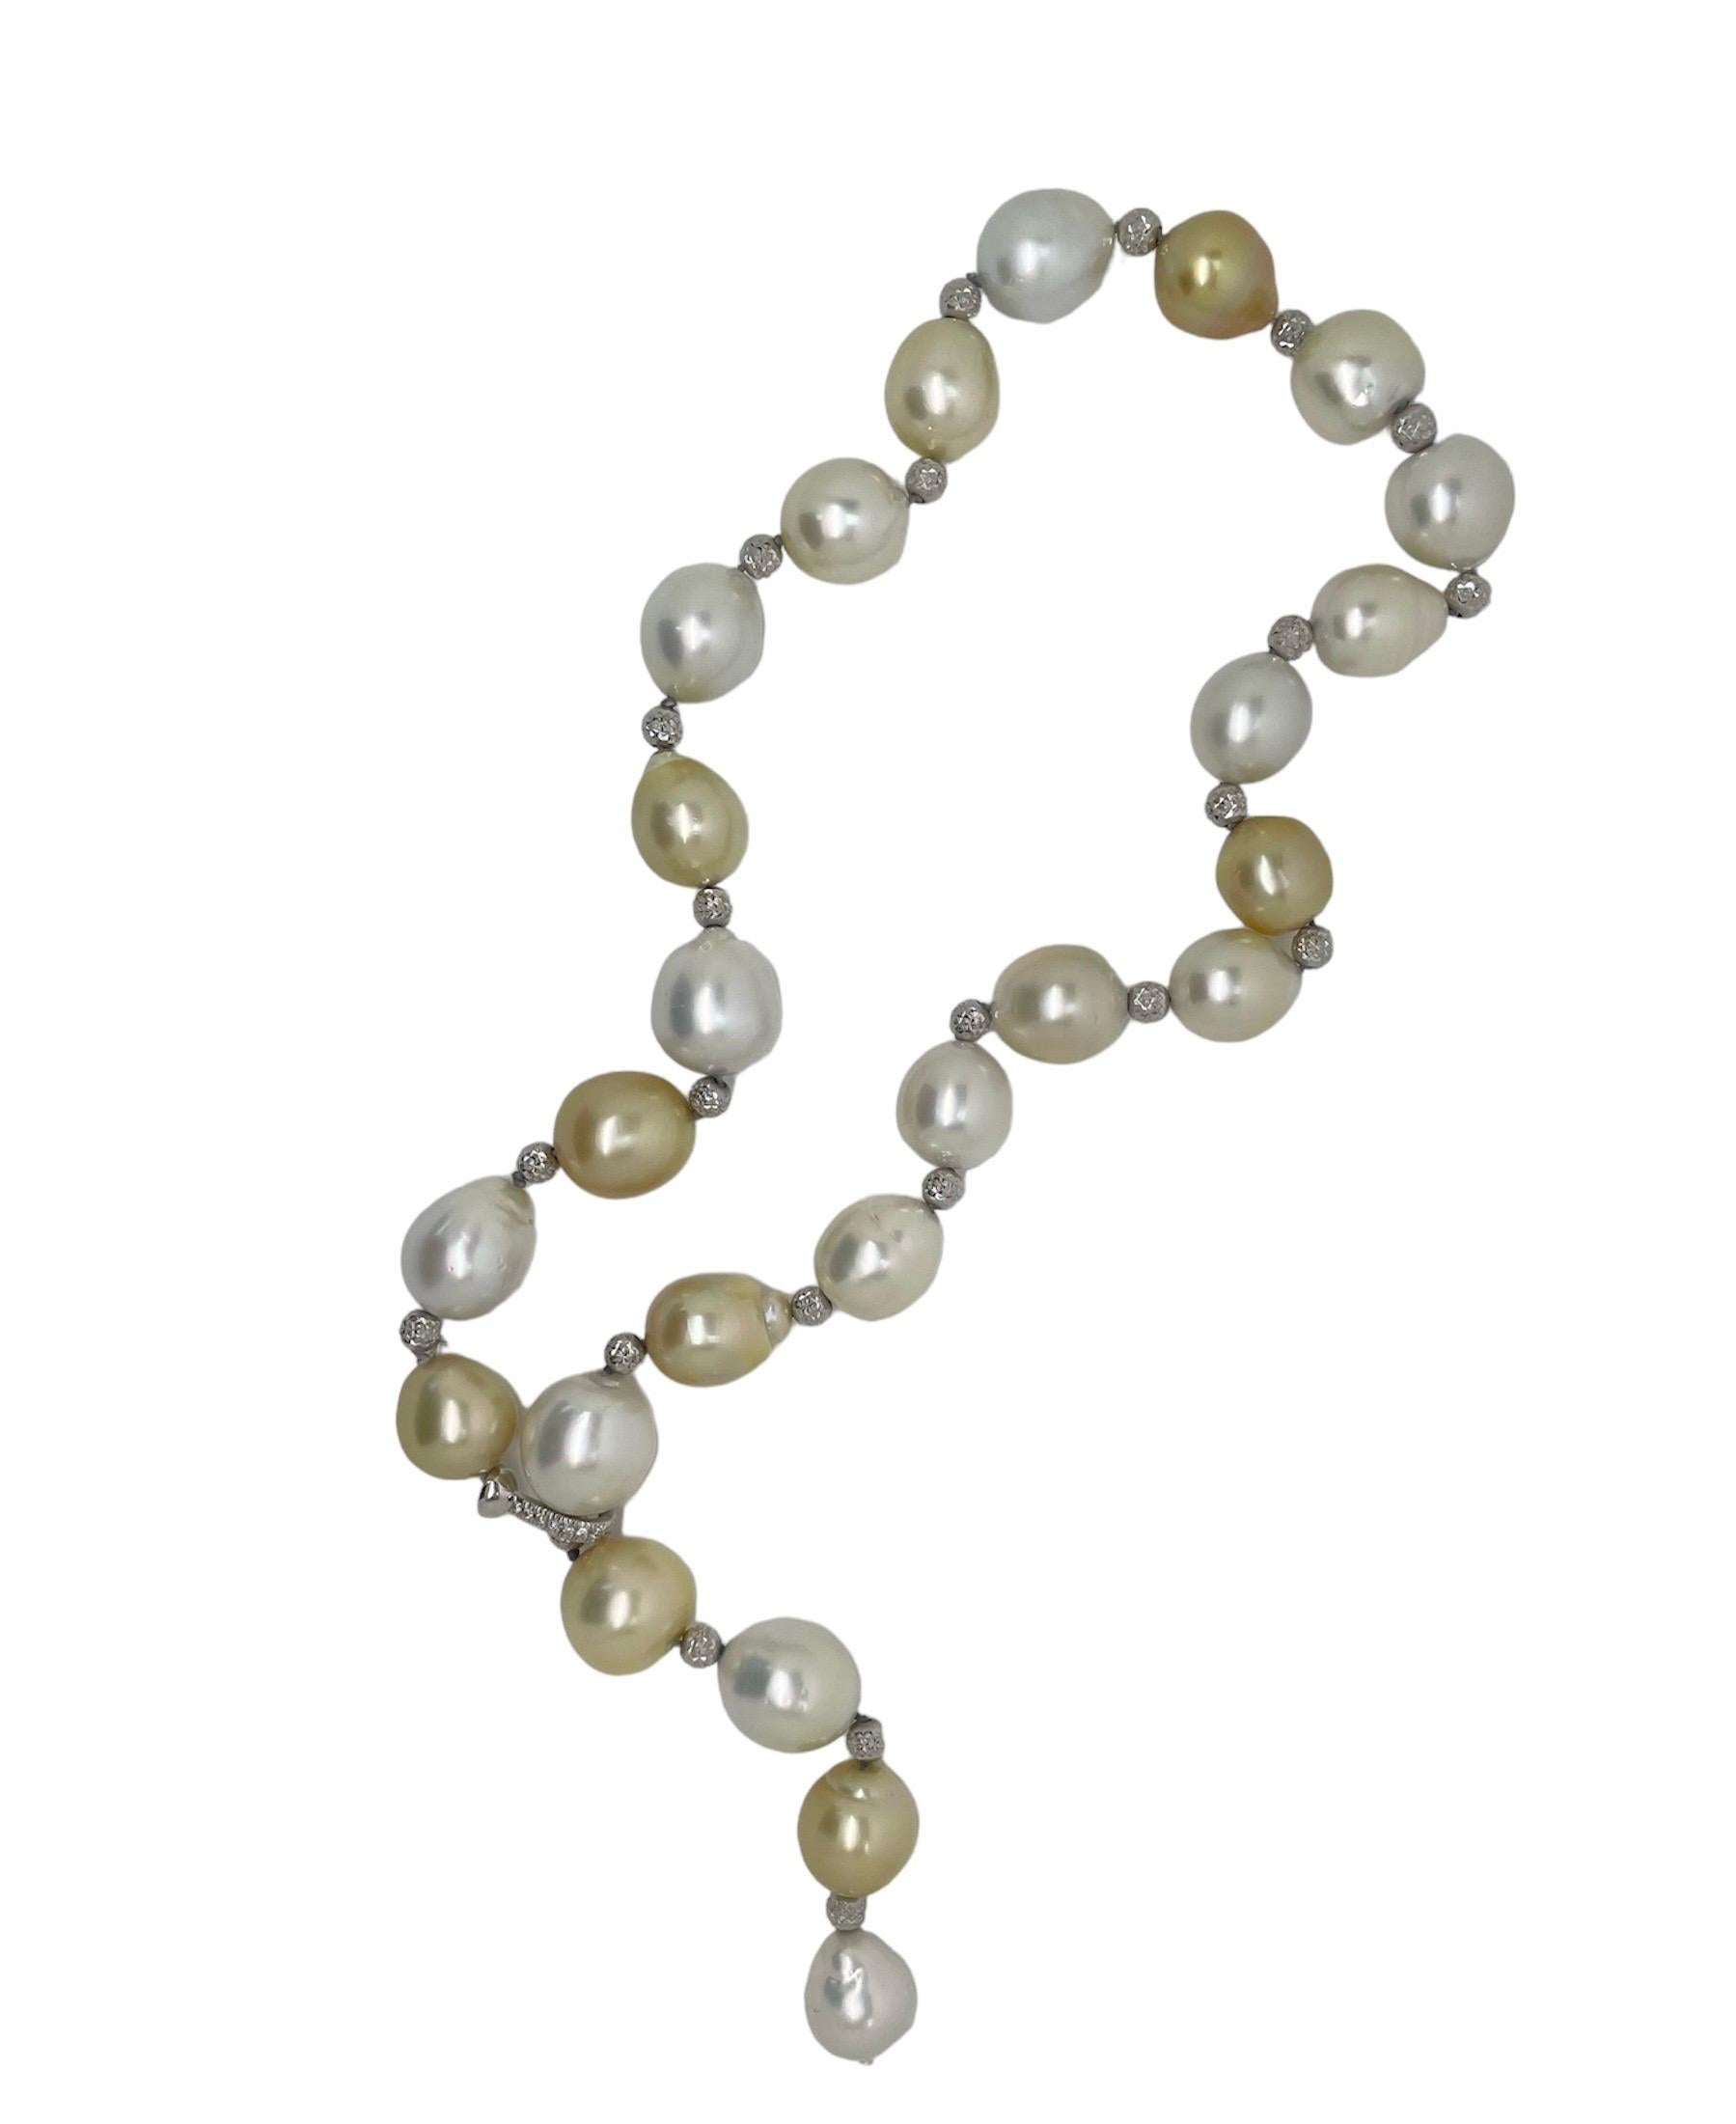 This gorgeous cultured Baroque pearl necklace is strung with lustrous white, cream and golden pearls, strung knotted with textured white gold rondelle beads and an adjustable 18 karat white gold and diamond clasp, allowing the necklace to be worn at